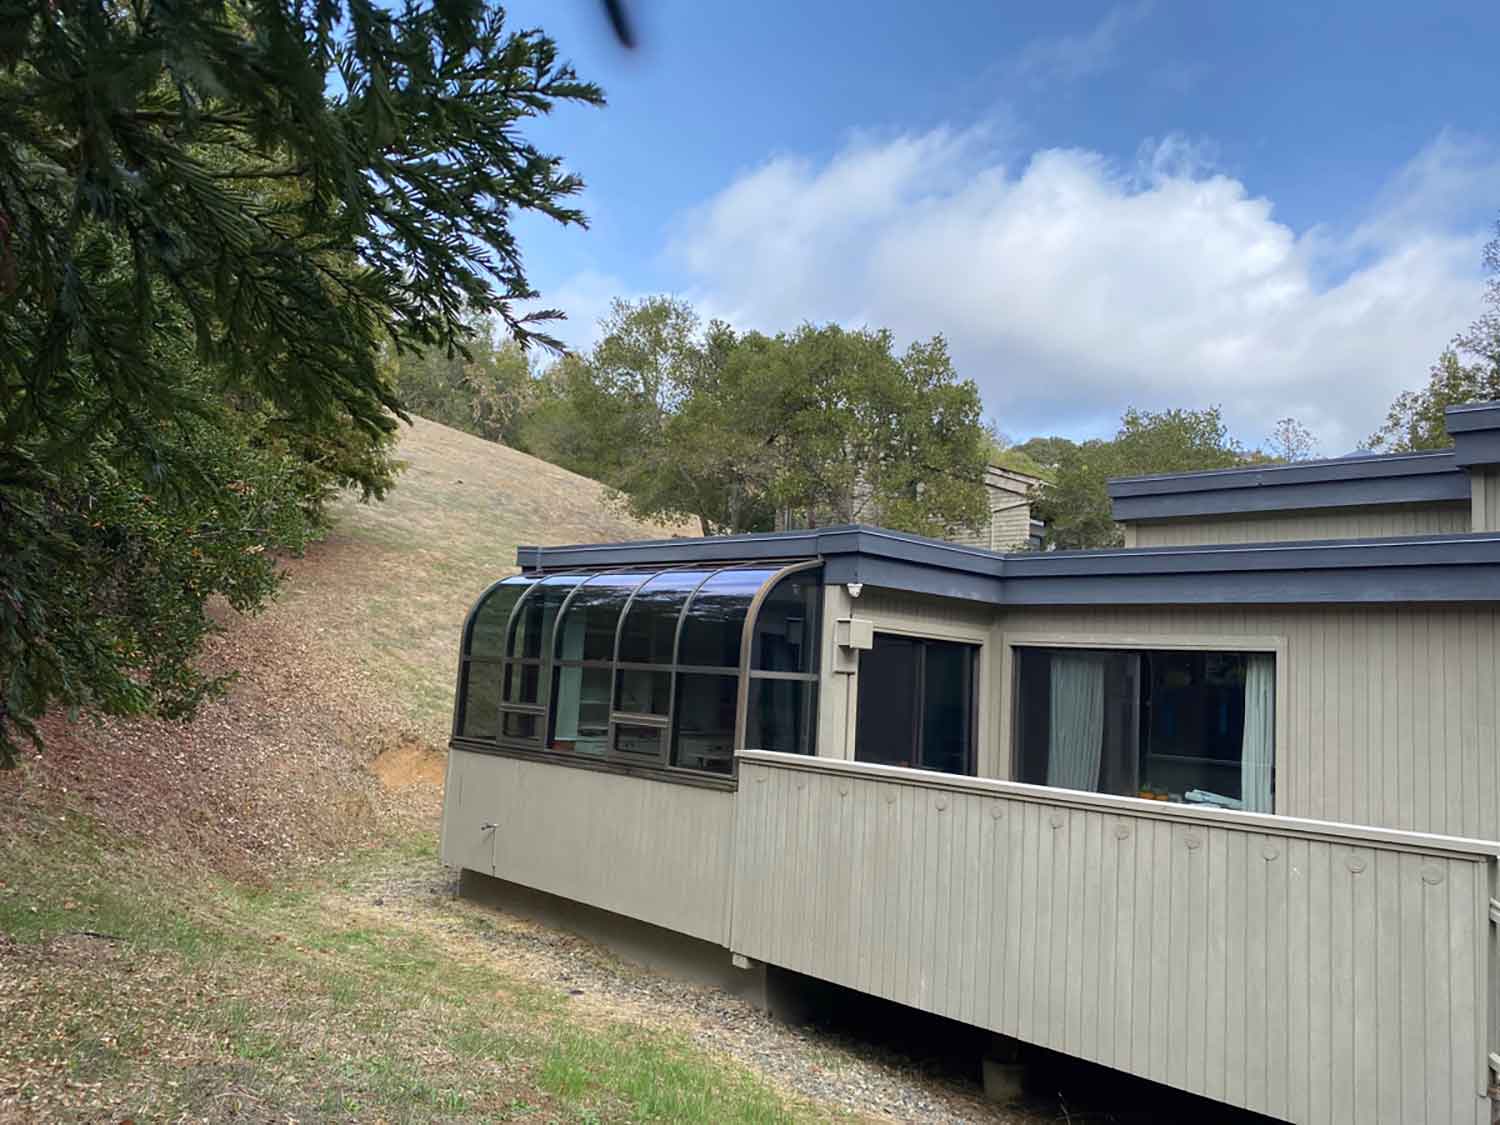 ClimatePro installed Exterior Window Film for this Portola Valley, CA Home.